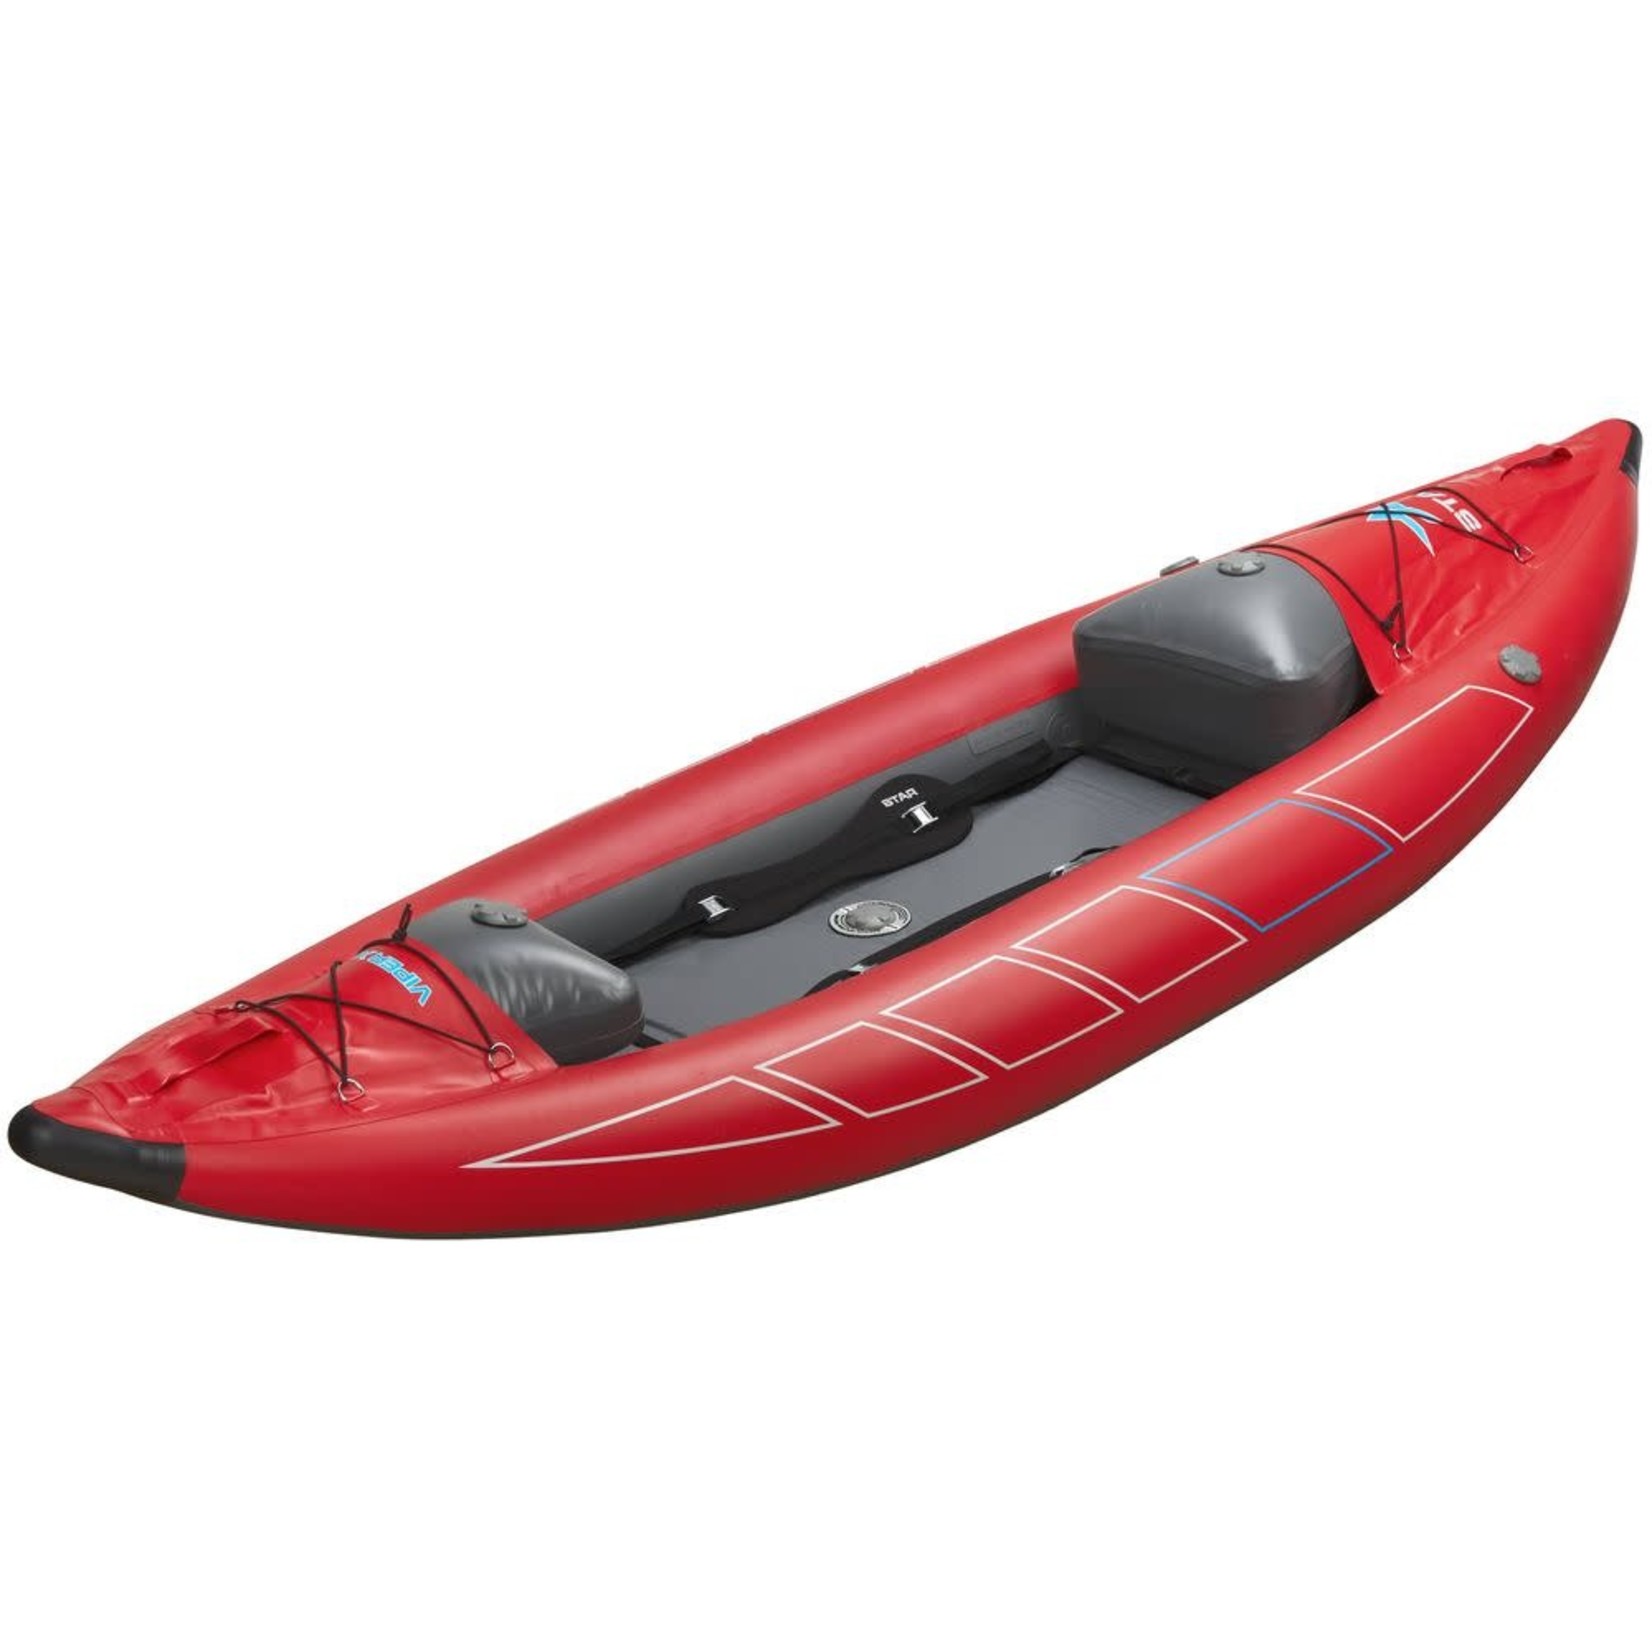 STAR Inflatables STAR Viper XL Inflatable Kayak